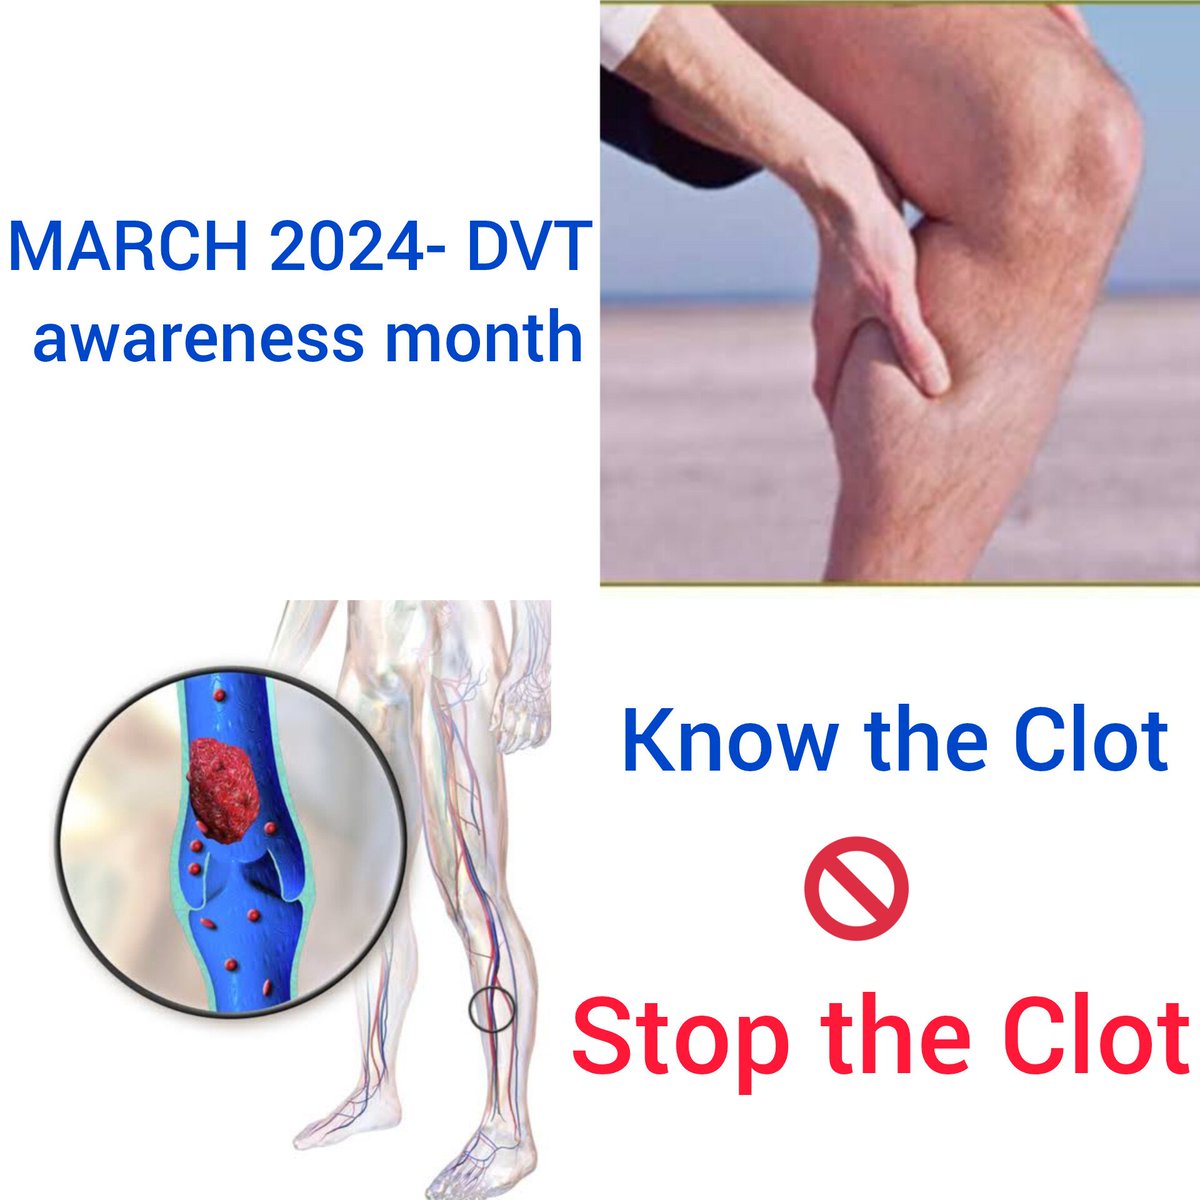 March is DVT awareness month! Early diagnosis-adequate management- reduce complications! #venousdisease #DVT #India #jammu 
#healthforall @PMOIndia @VascularSVS